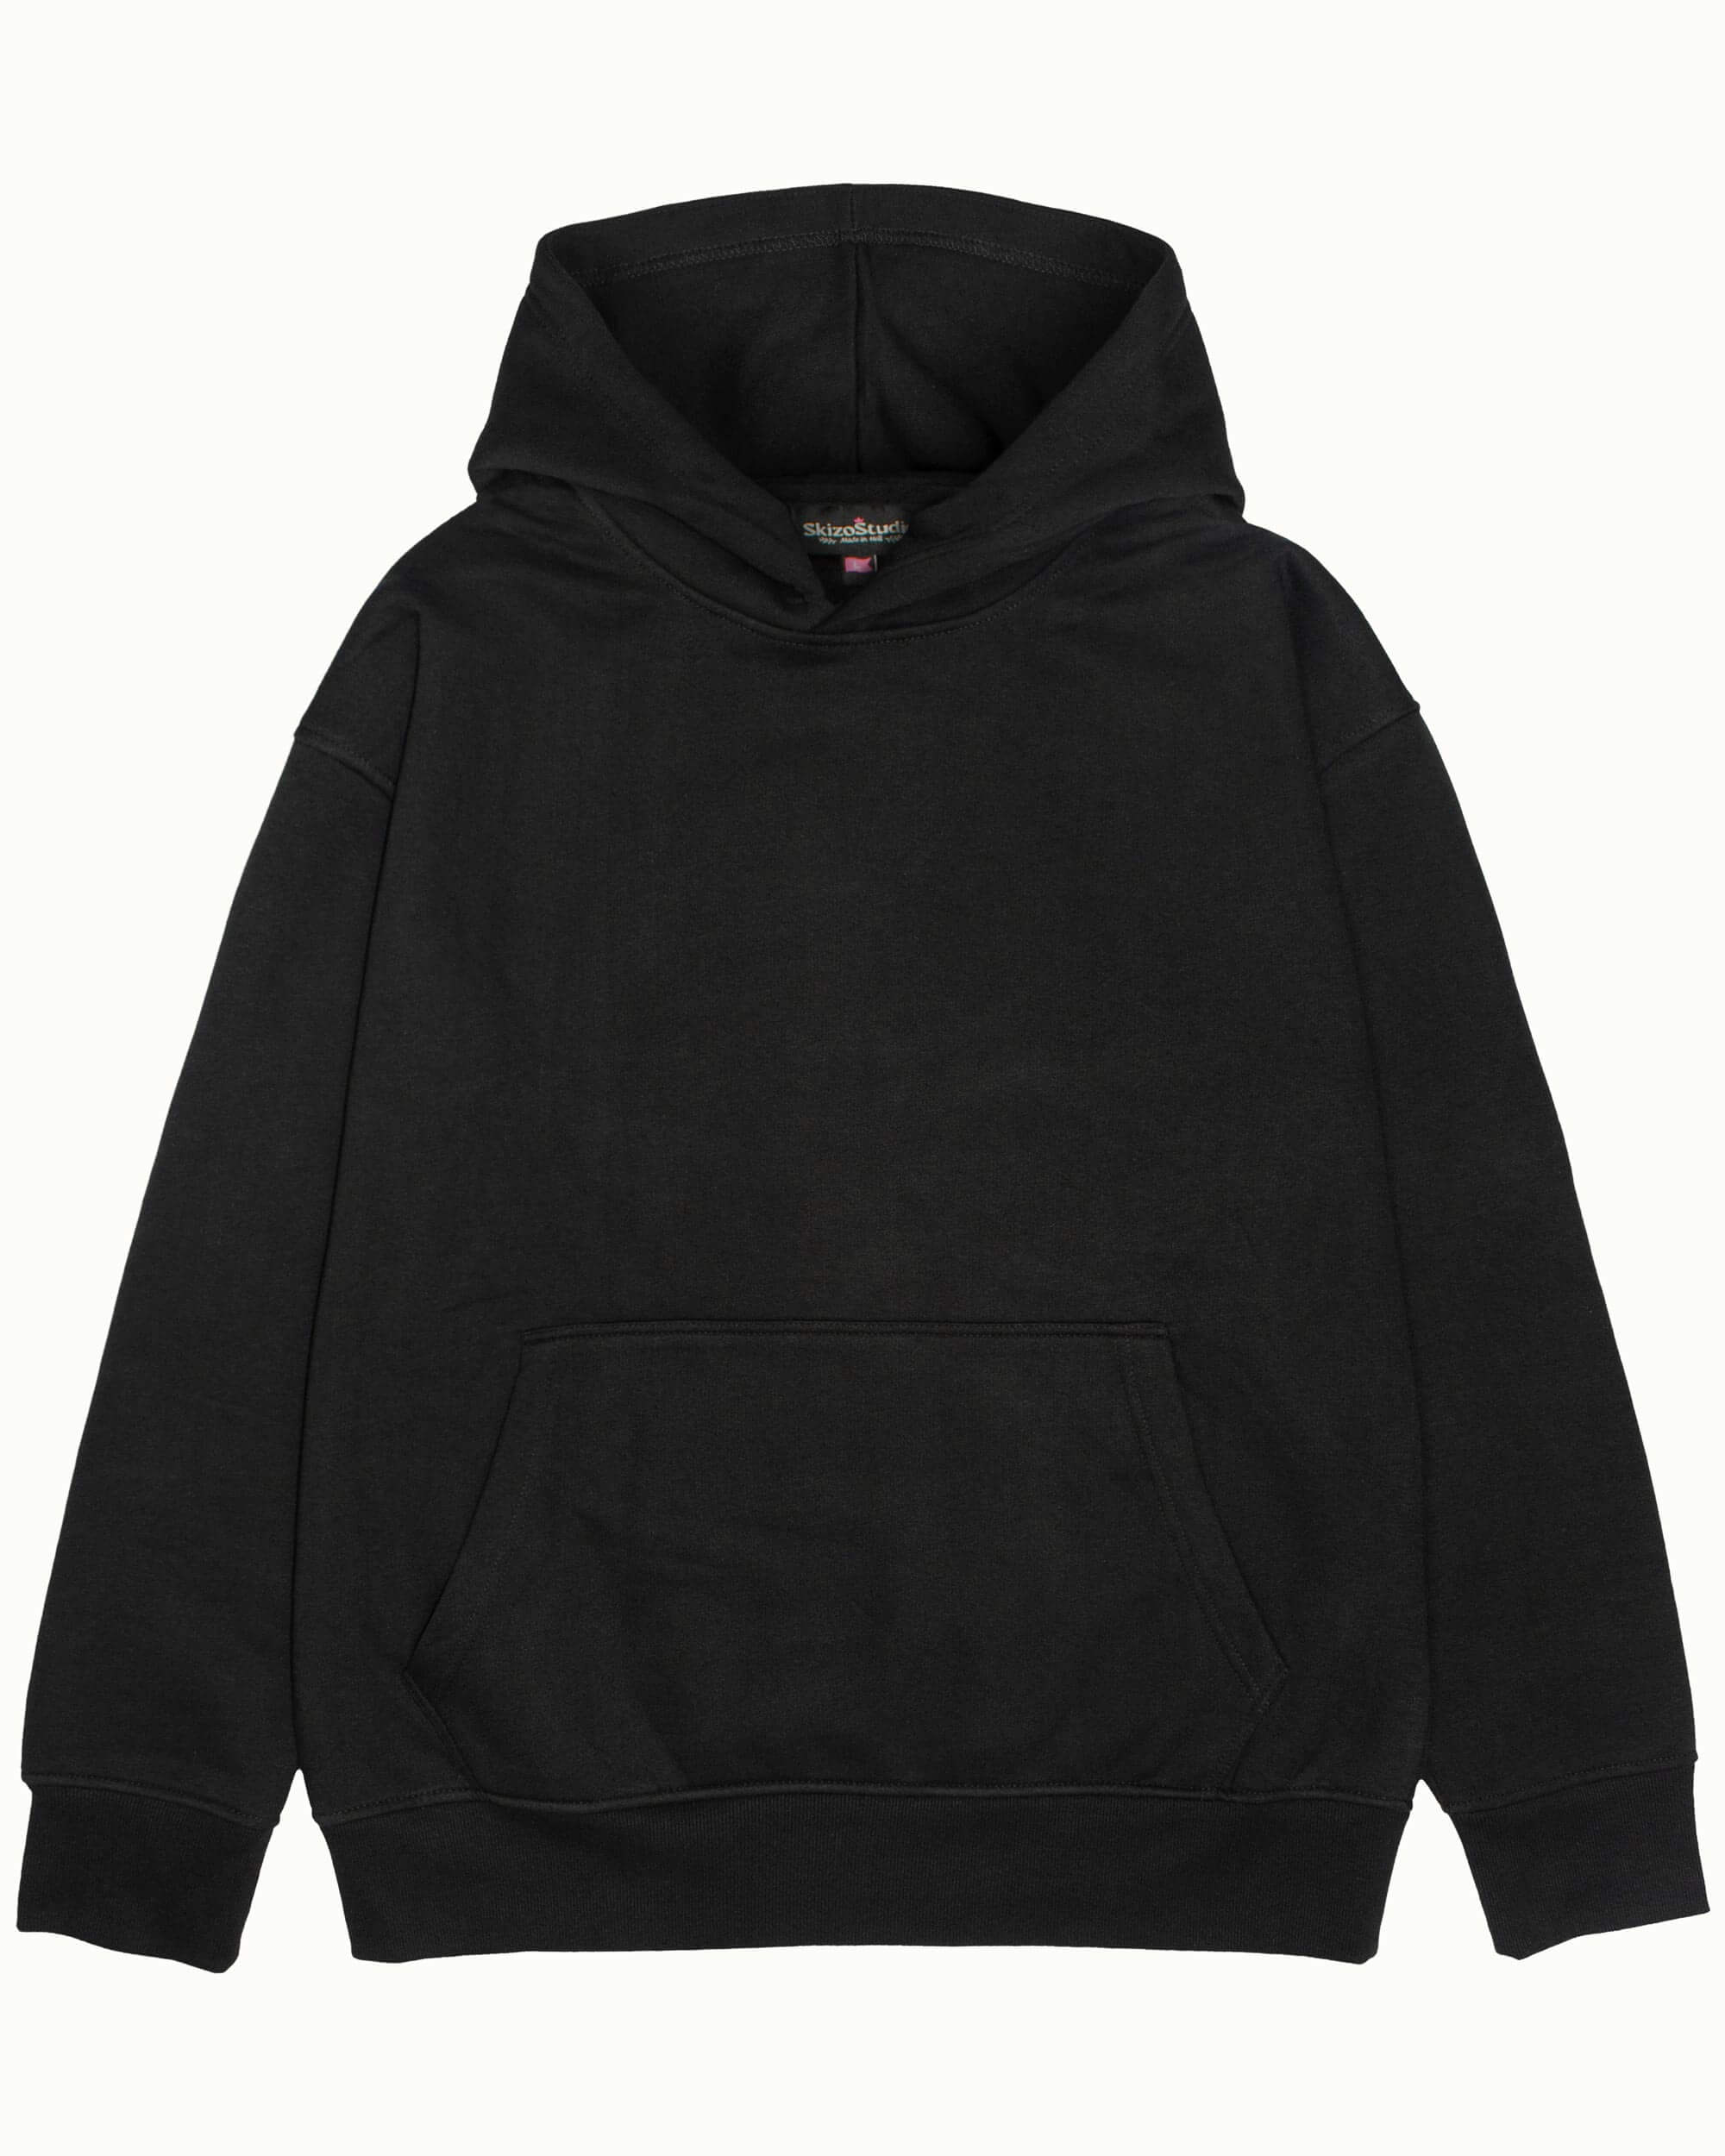 The Perfect Blank Hoodie